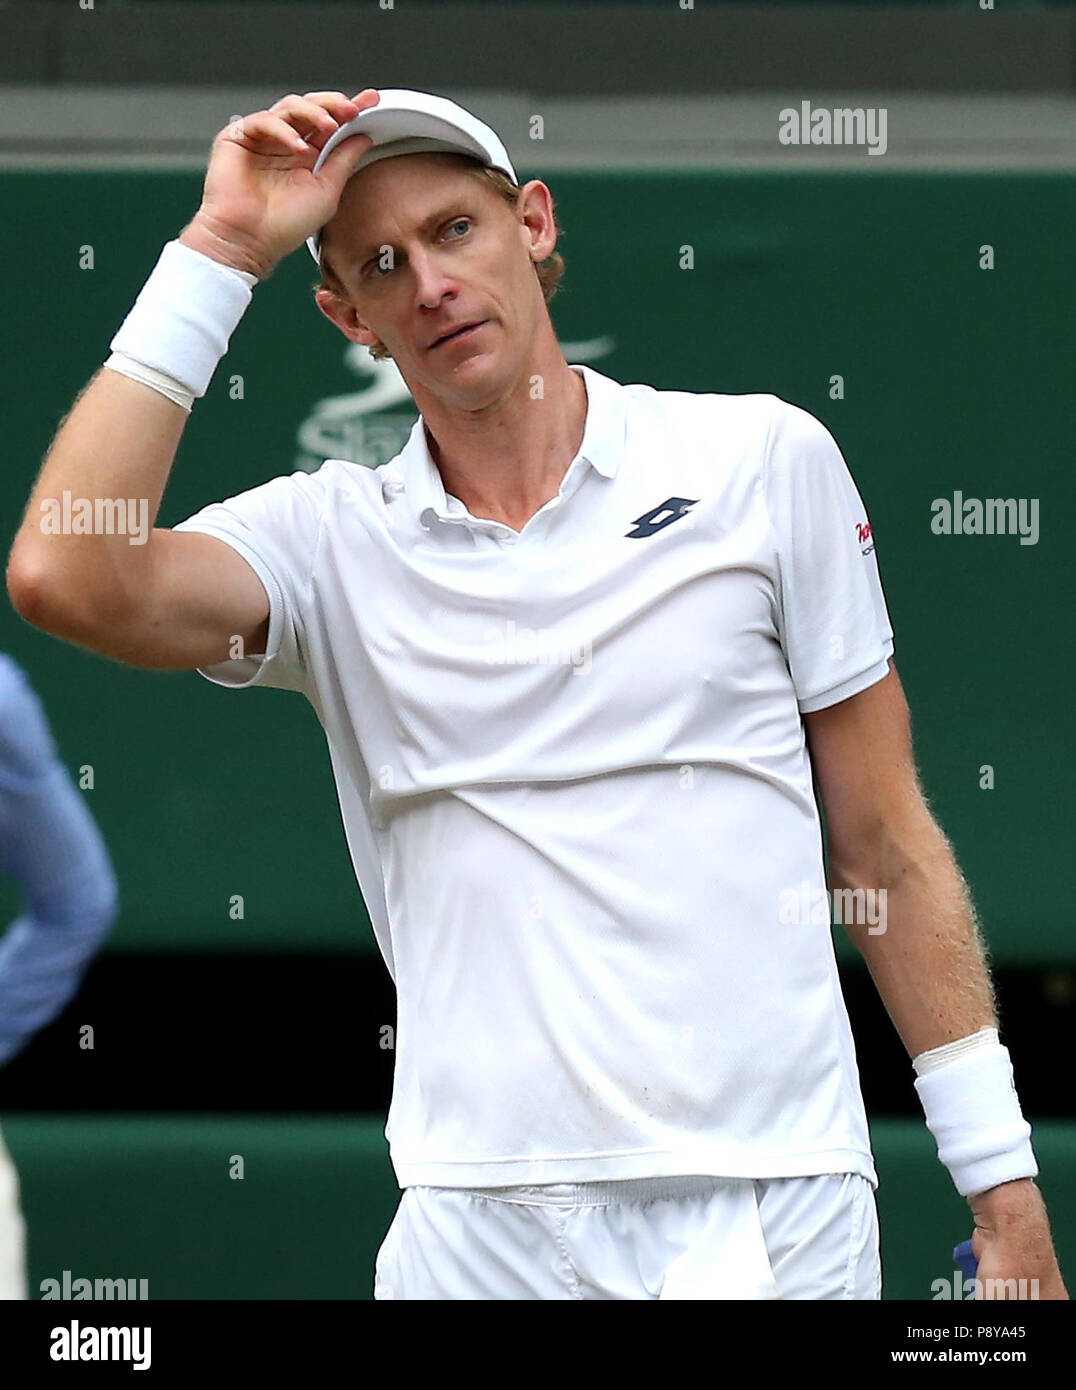 South African eighth seed Kevin Anderson celebrates having reached his first Wimbledon final, beating American ninth seed John Isner 7-6 (8/6) 6-7 (5/7) 6-7 (9/11) 6-4 26-24 in the longest semi-final in the tournament's history on day eleven of the Wimbledon Championships at the All England Lawn tennis and Croquet Club, Wimbledon. PRESS ASSOCIATION Photo. Picture date: Friday July 13, 2018. See PA story tennis Wimbledon. Photo credit should read: Steven Paston/PA Wire. RESTRICTIONS: Editorial use only. No commercial use without prior written consent of the AELTC. Still image use only - no mo Stock Photo